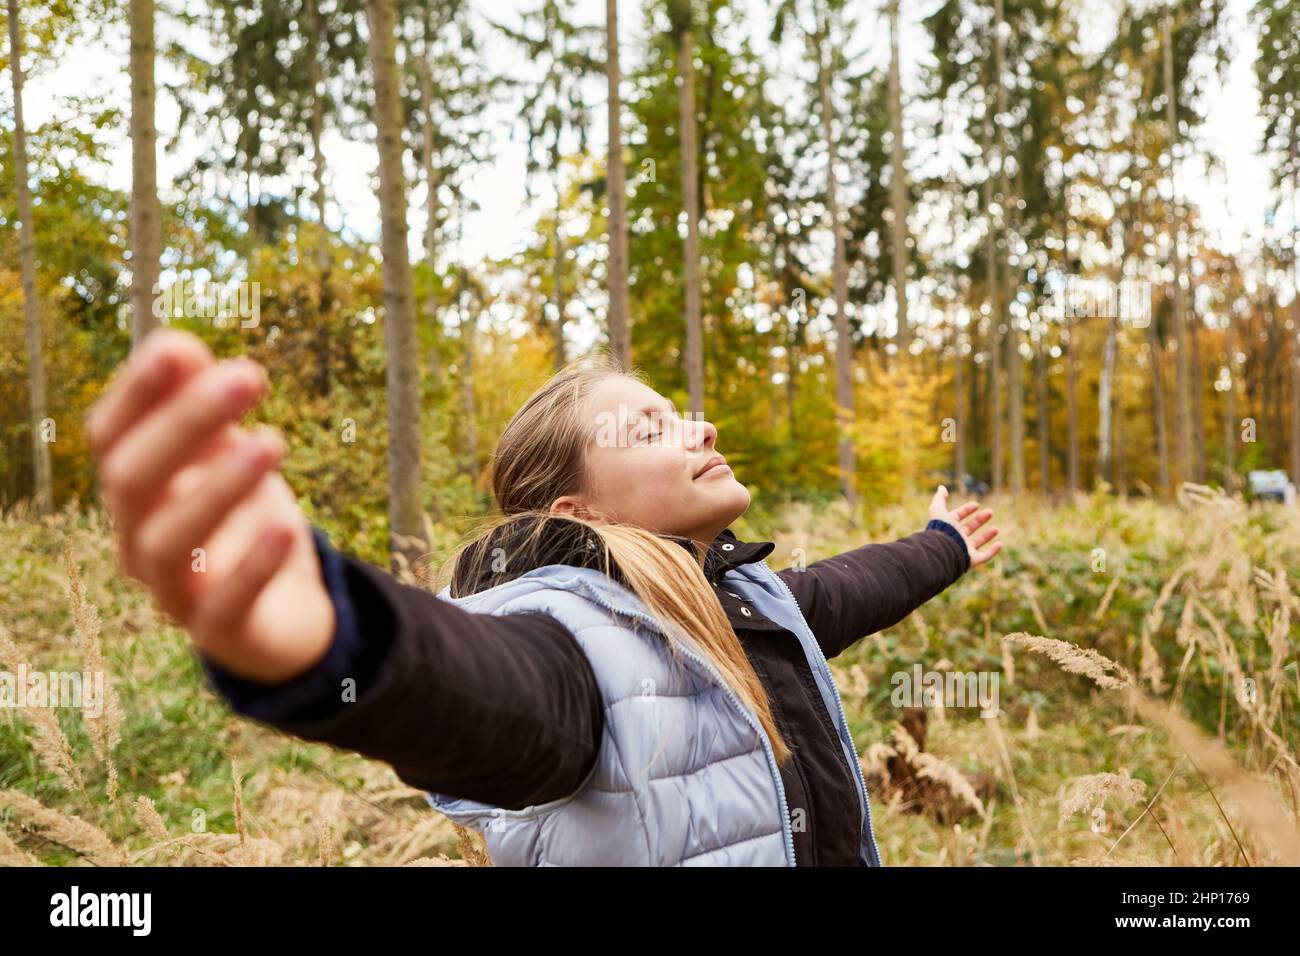 Girl with arms outstretched in the forest doing a yoga breathing exercise for relaxation Stock Photo